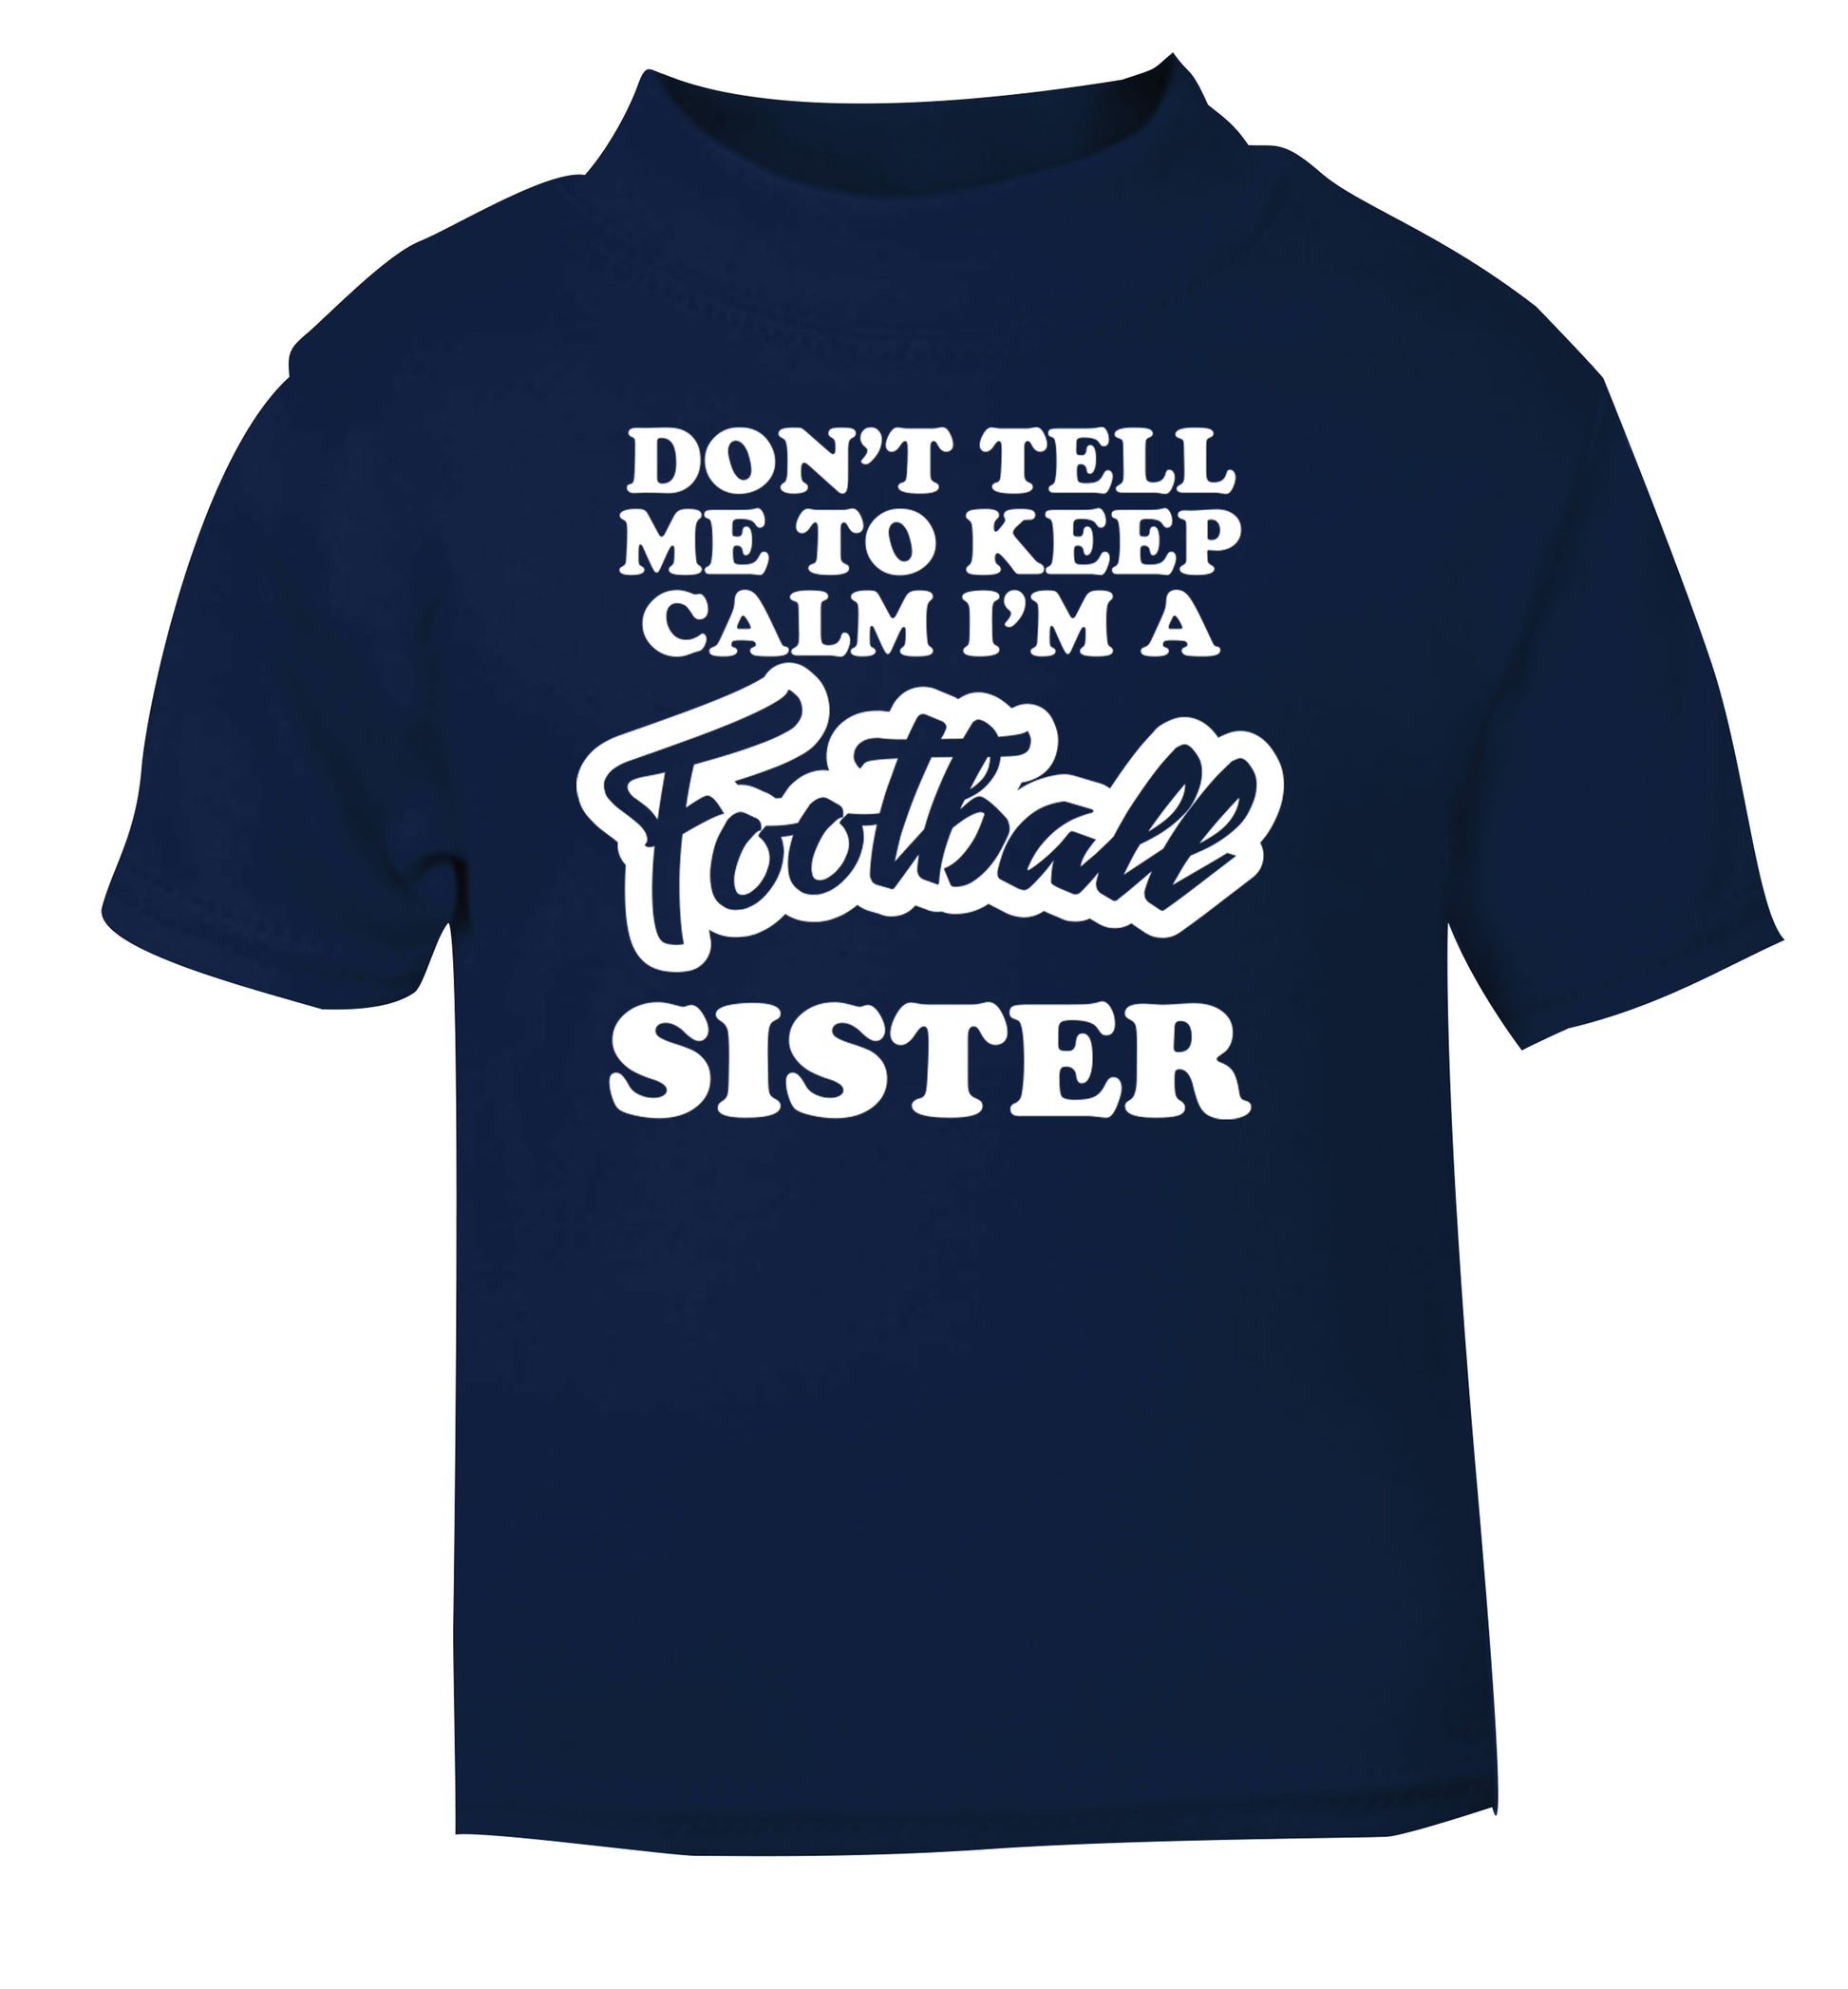 Don't tell me to keep calm I'm a football sister navy Baby Toddler Tshirt 2 Years